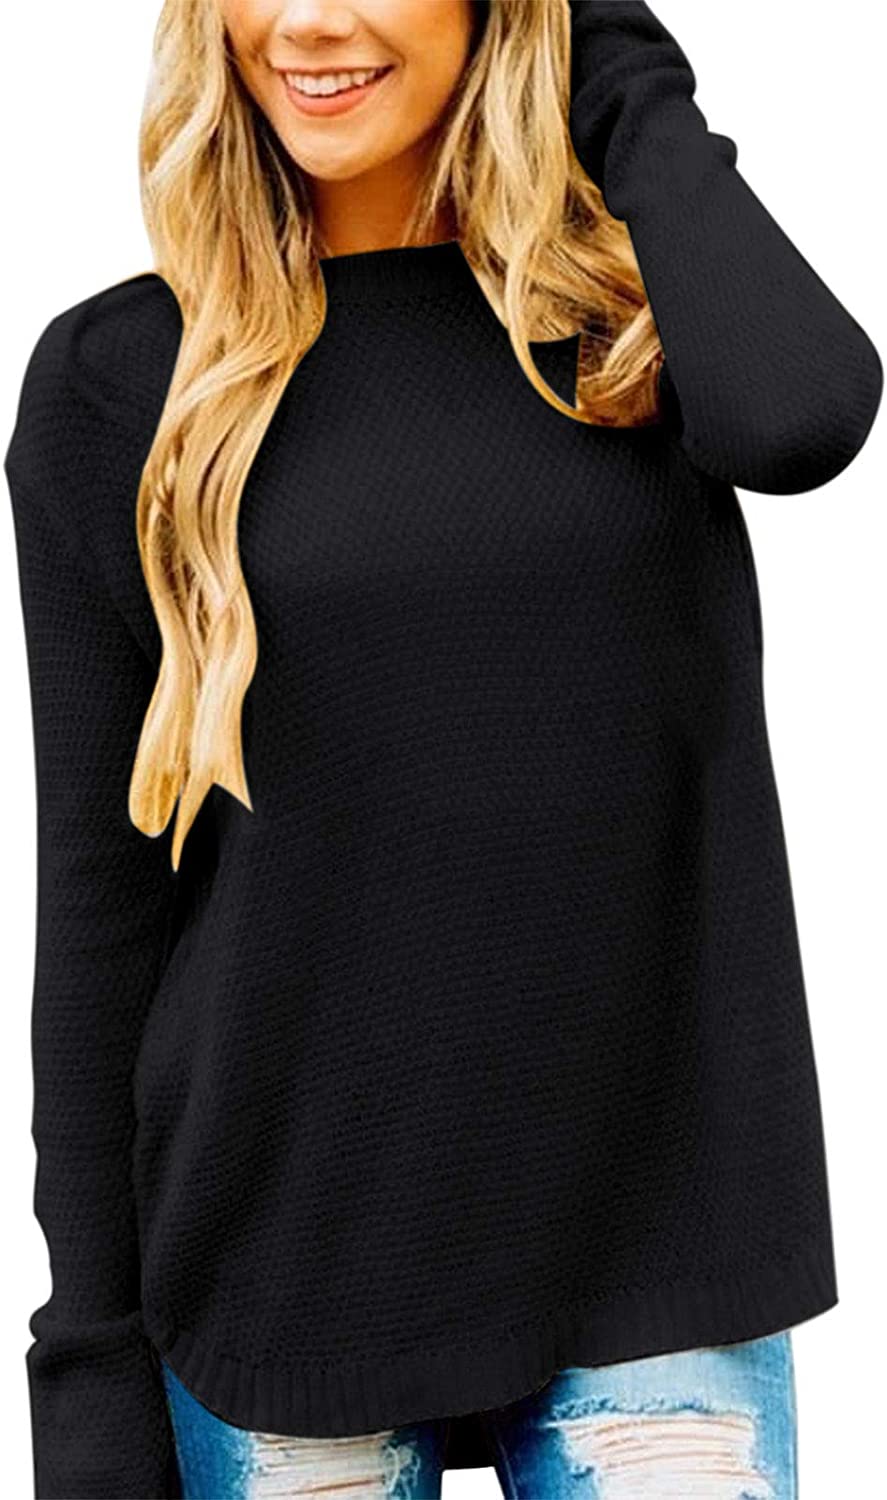 Women's Long Sleeve Oversized Crew Neck Solid Color Knit Pullover Sweater Tops